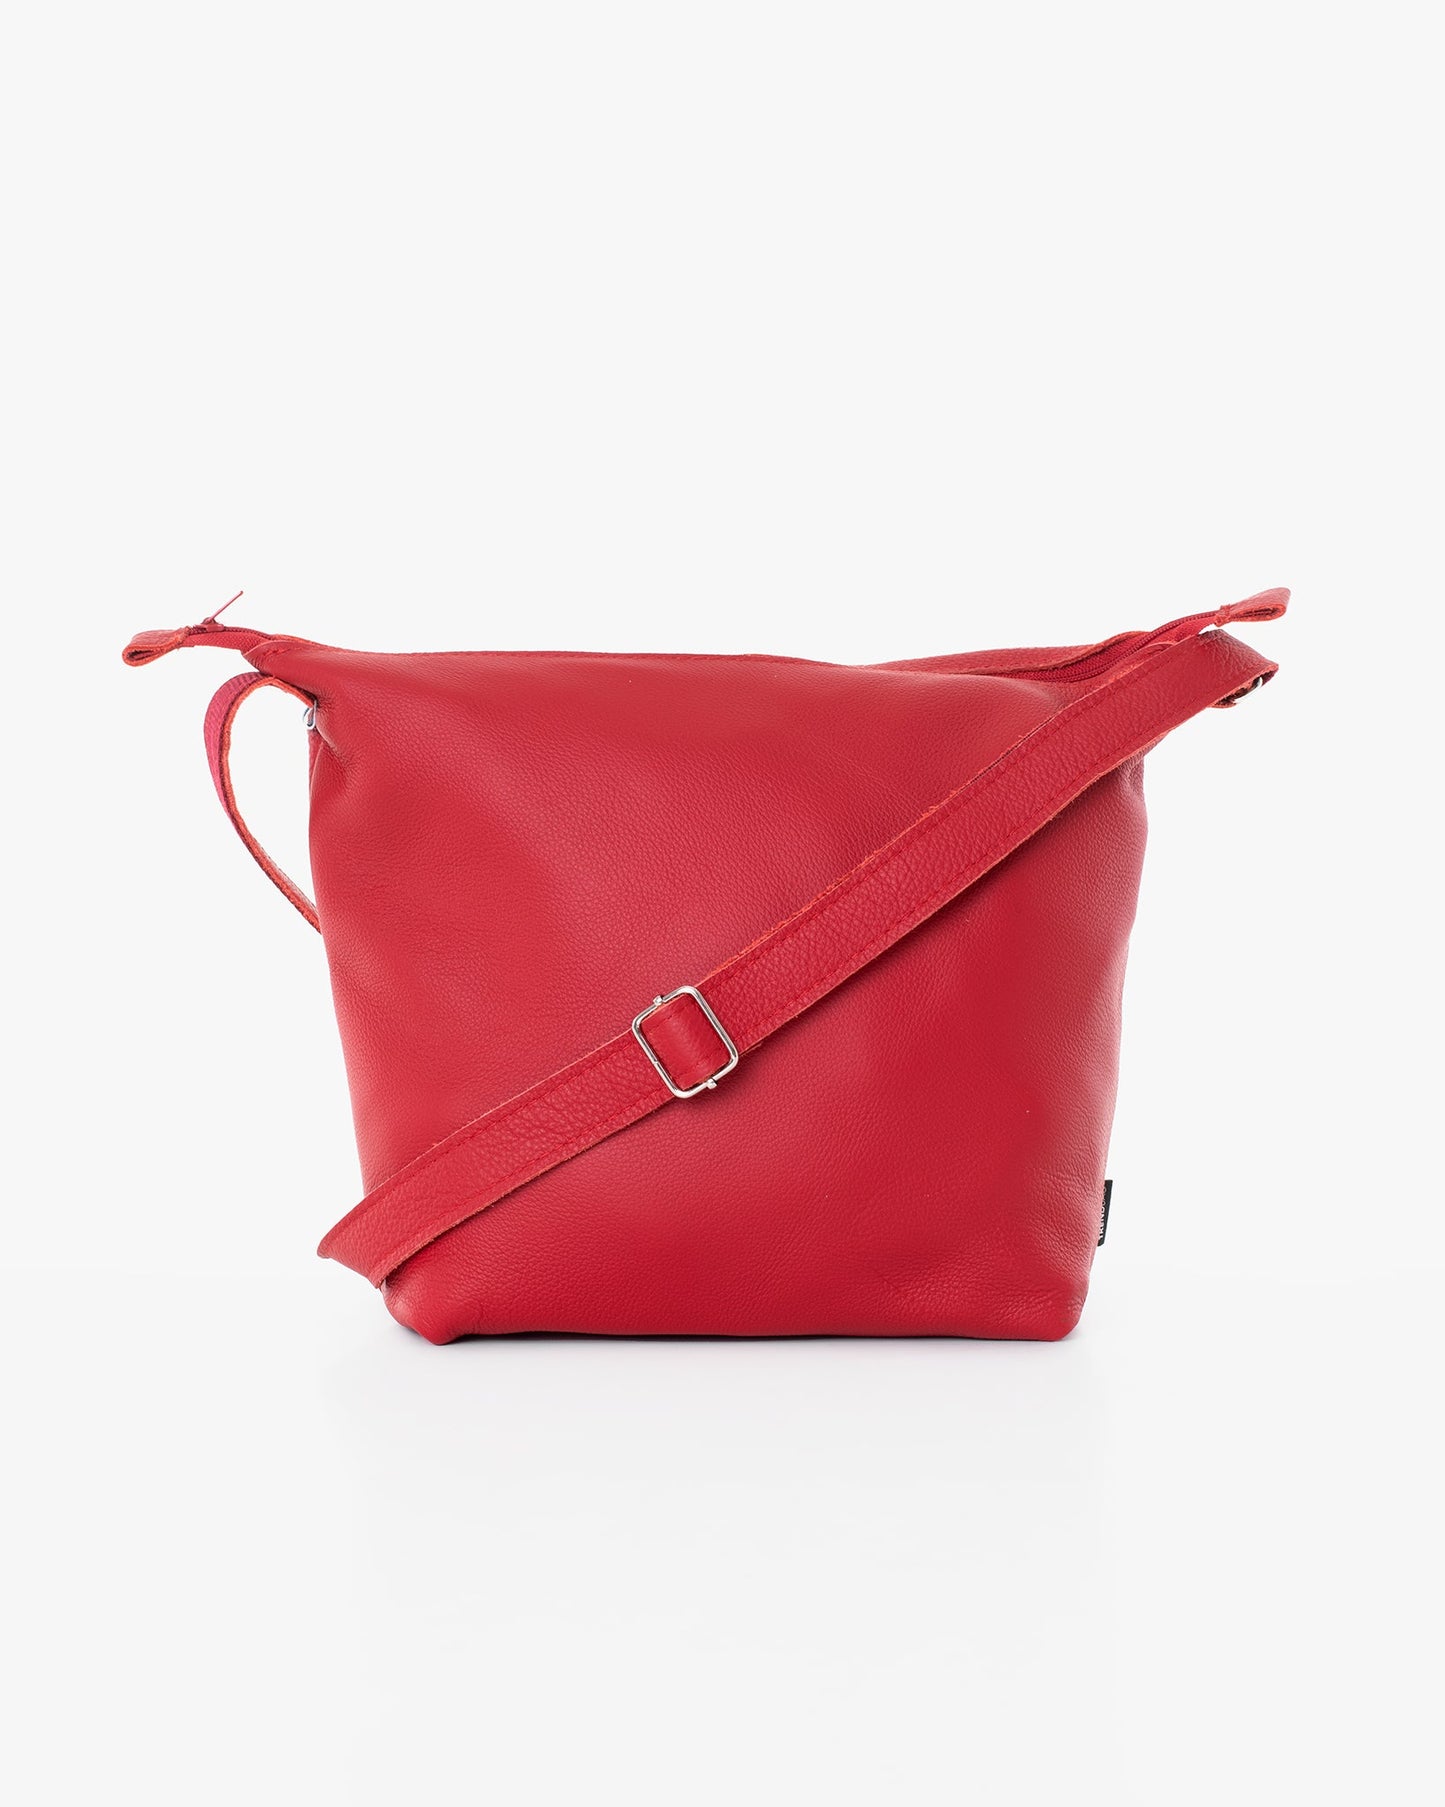 Handmade Suvi XS shoulder bag in red leather, featuring a buckle detail. Made from furniture industry leftovers, with zippered compartments. Designed and crafted in Estonia.